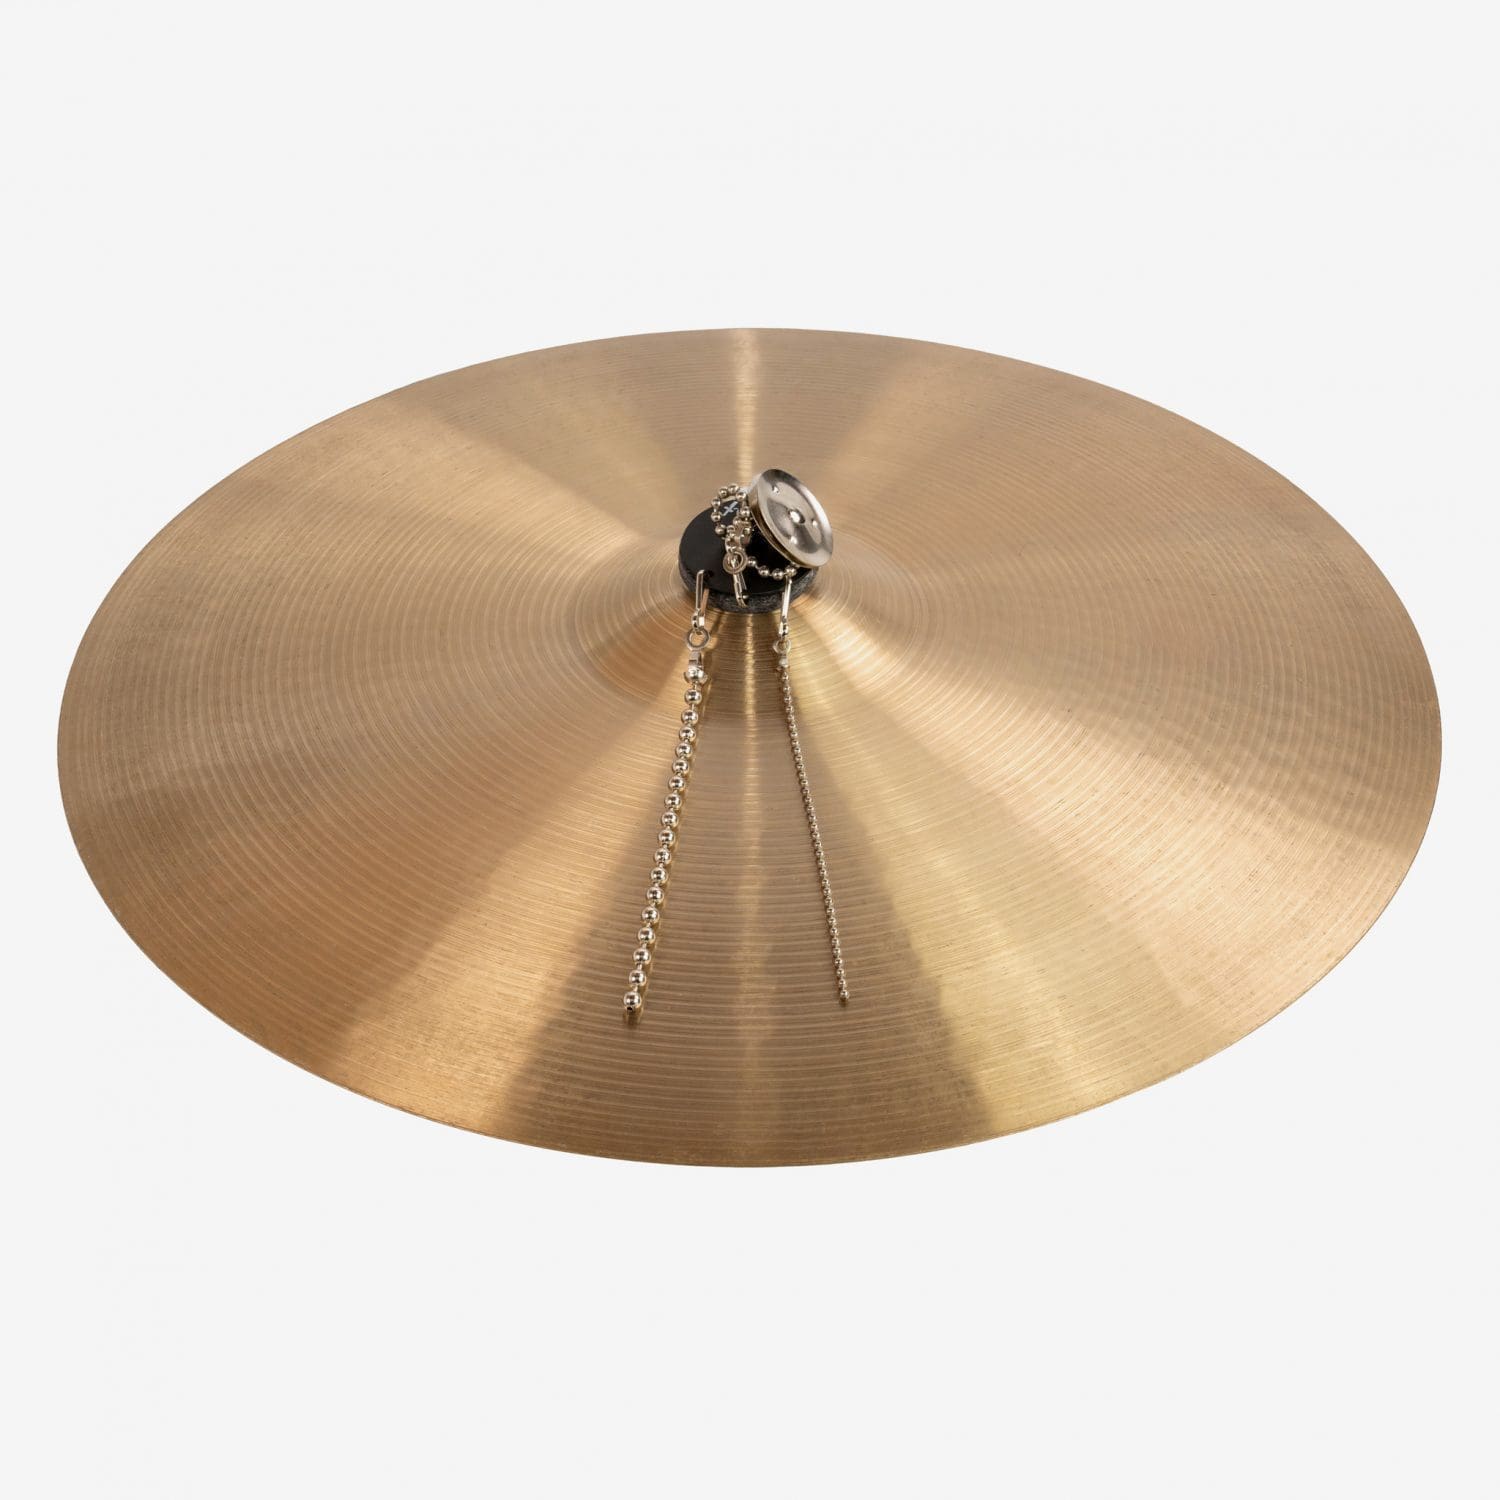 X-MAG Cymbal Sizzle